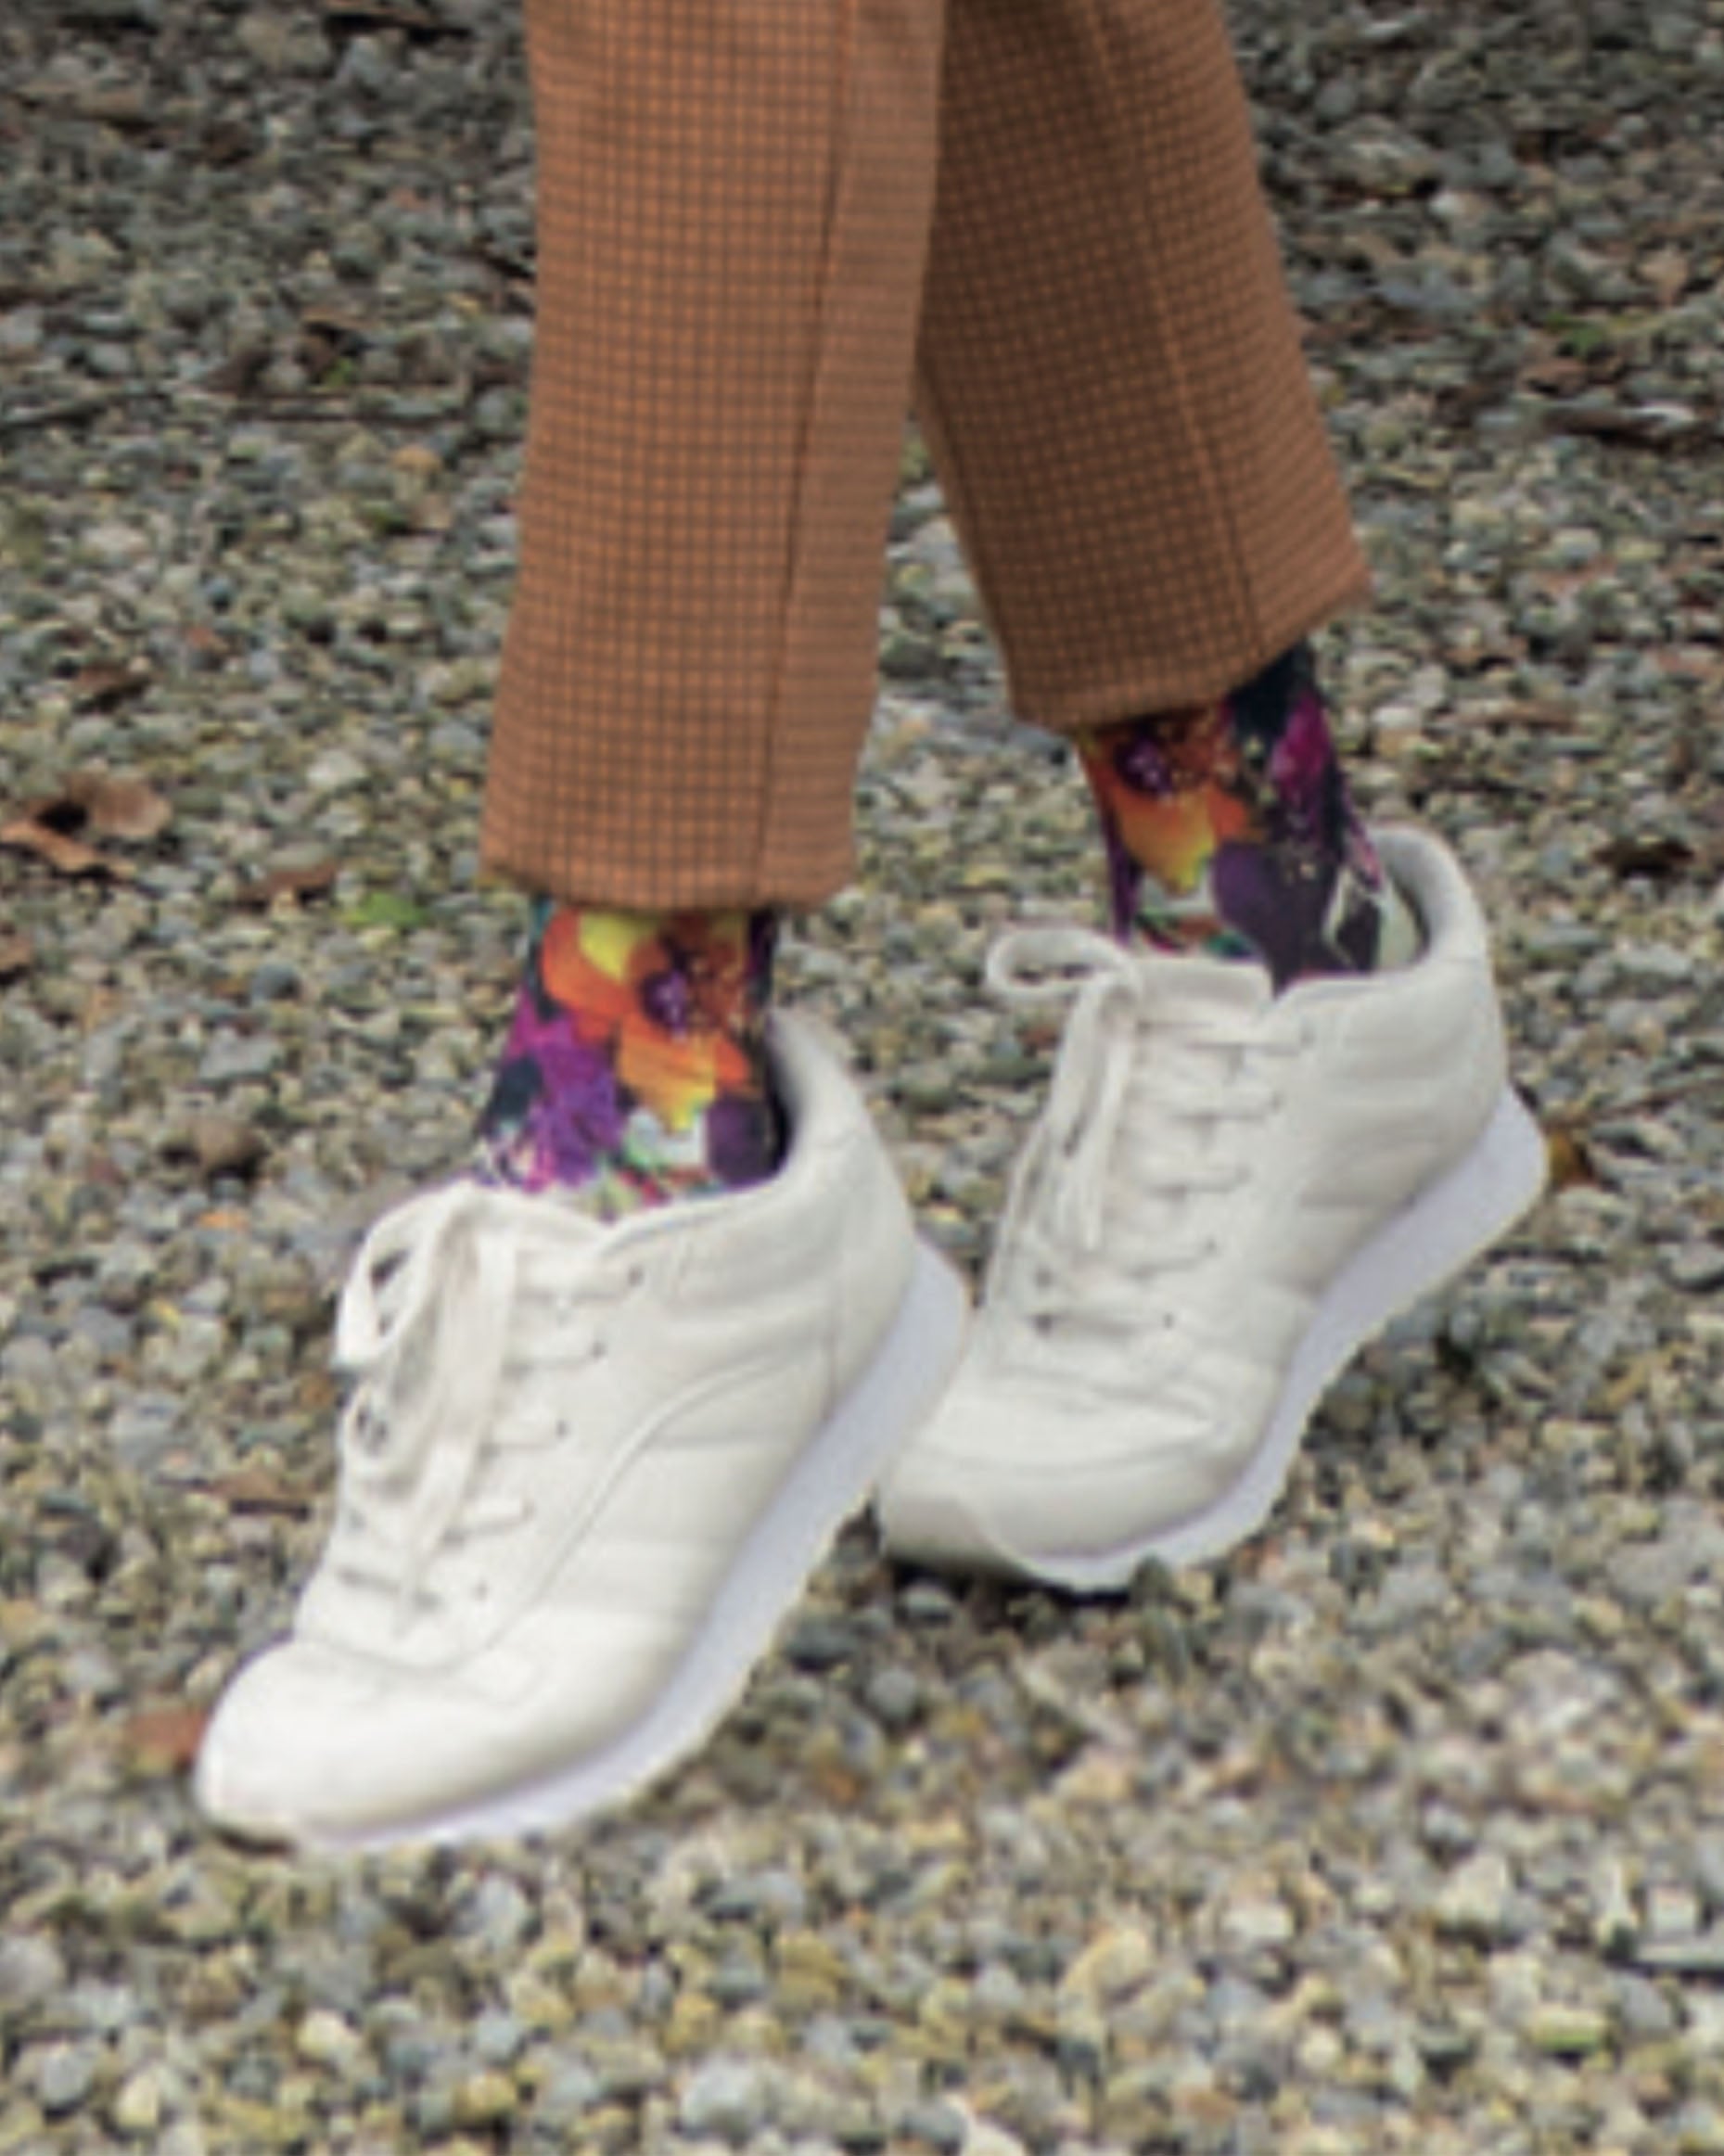 Omero Fantasy (Flowers) Calzino - Opaque fashion ankle socks with an all over digital print of colourful flowers.